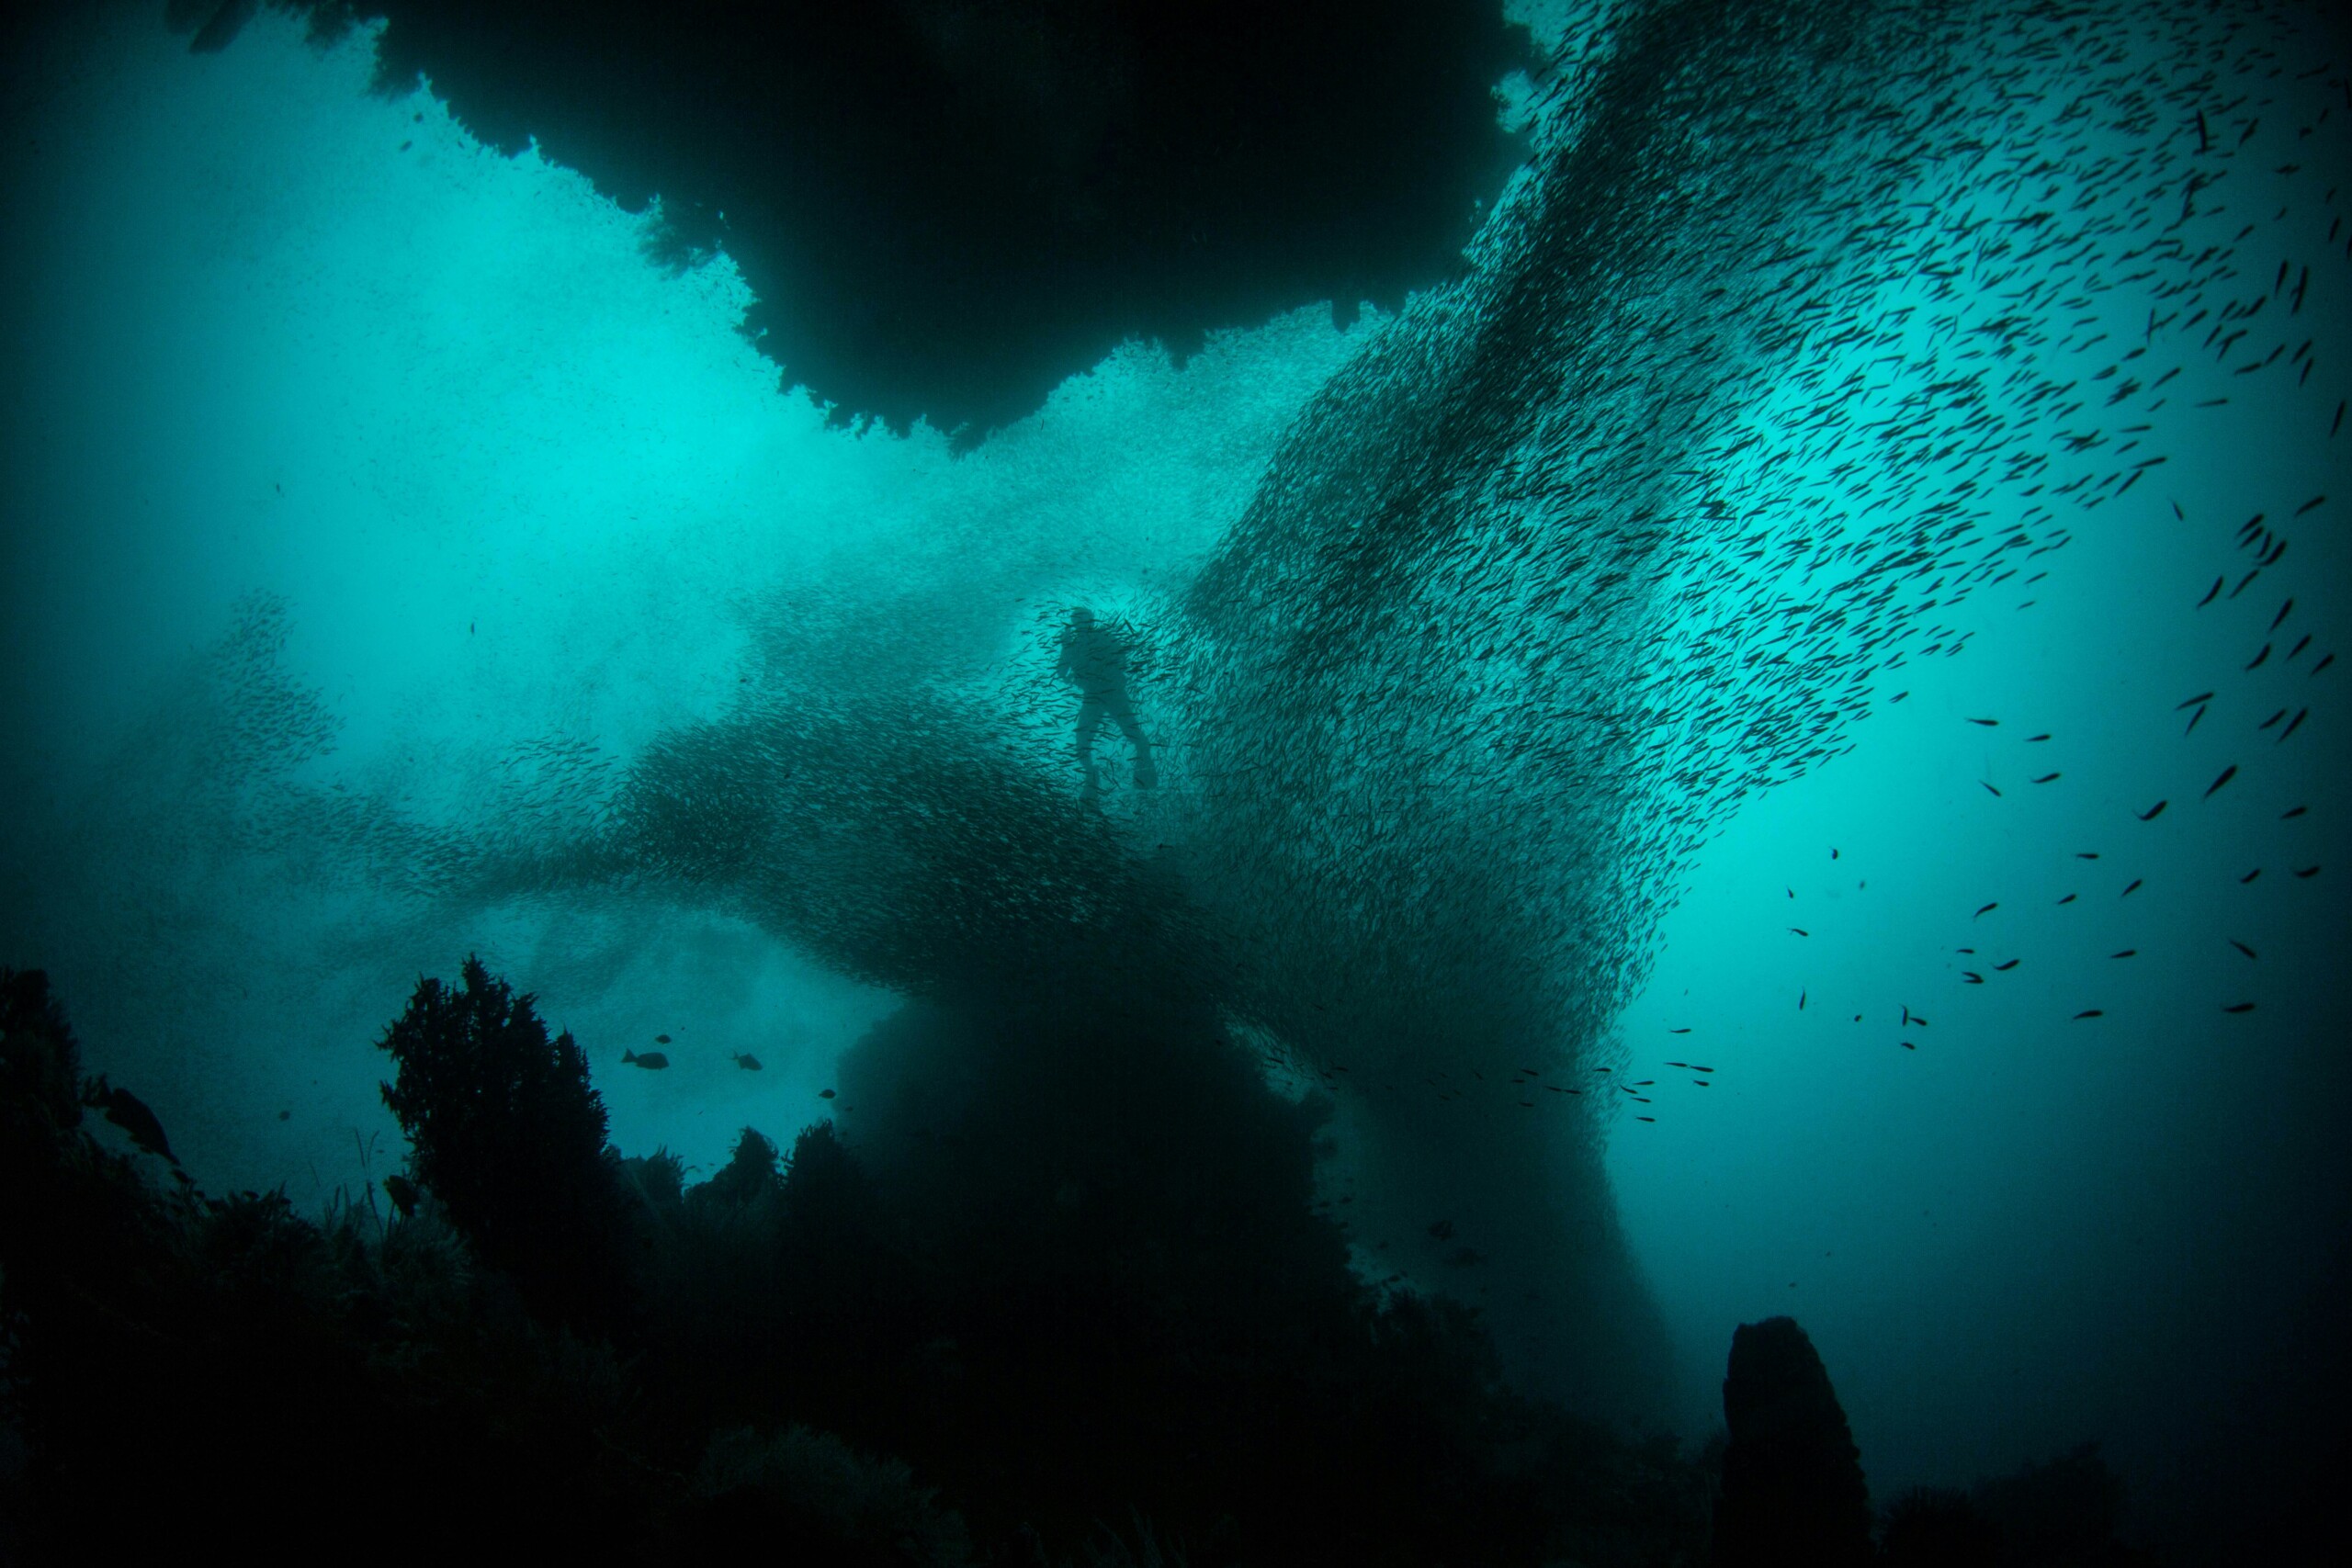 A scuba-diving human figure and schools of fish seen from underneath